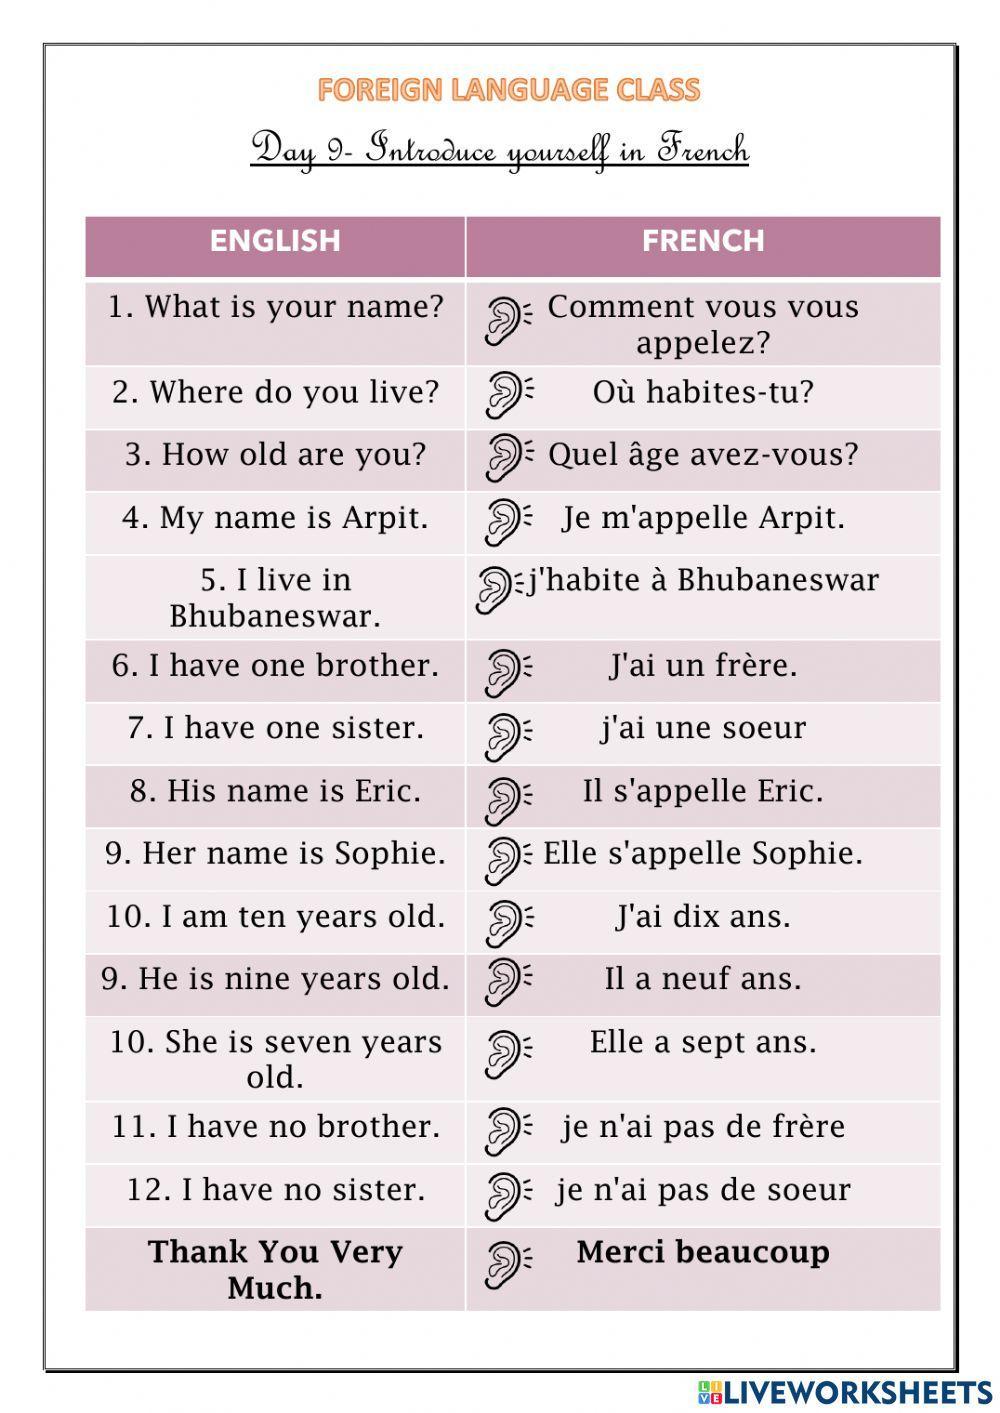 How to do introduction in French worksheet | Live Worksheets